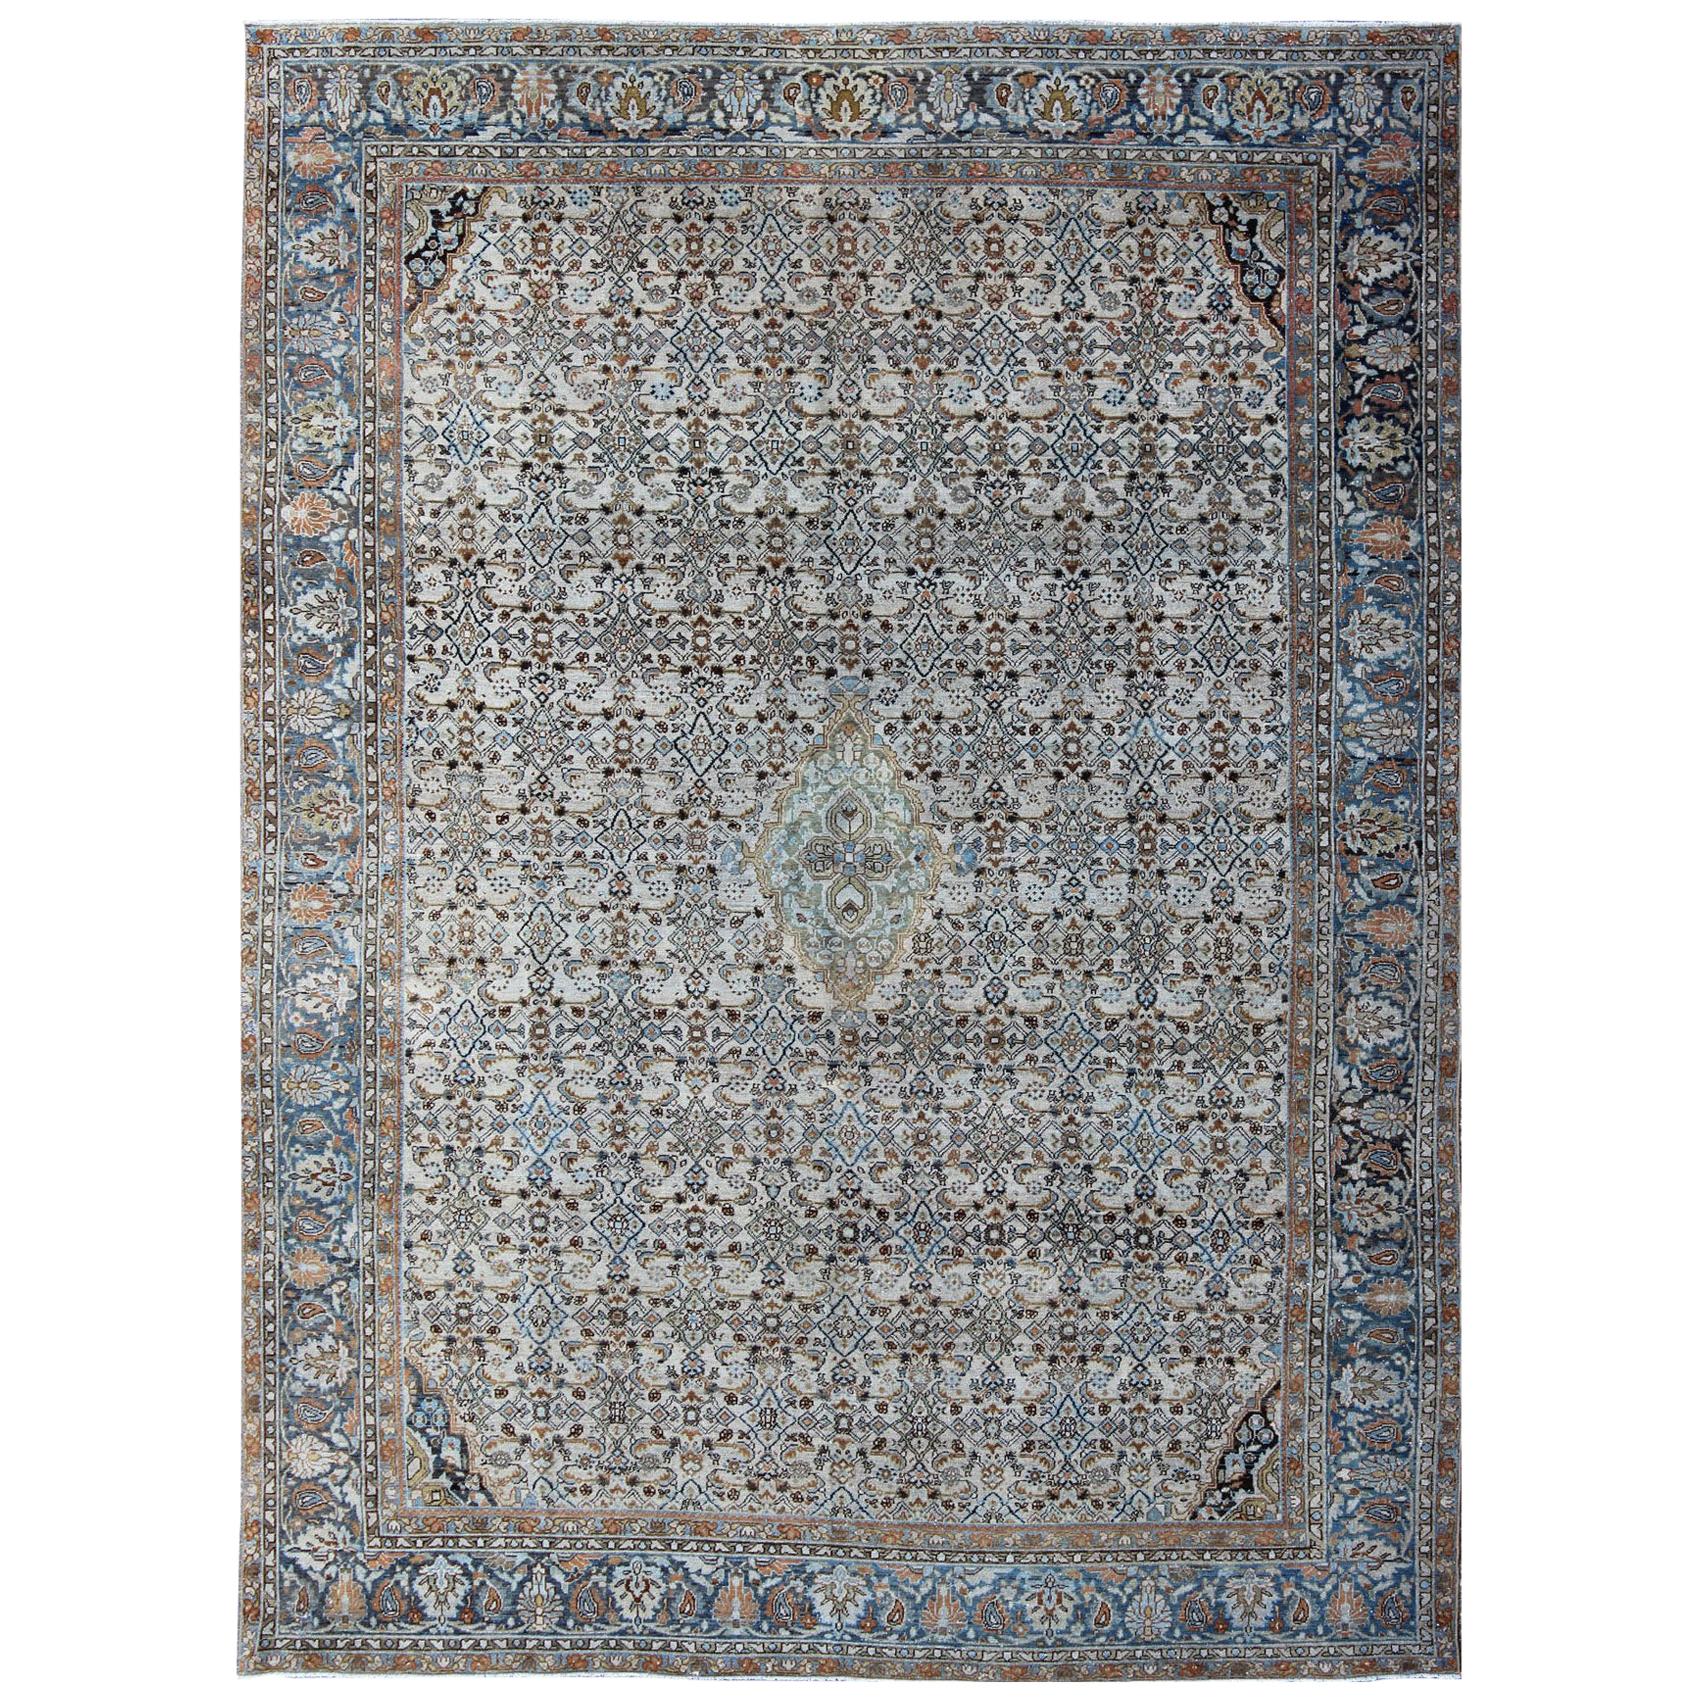 Antique Persian Malayer Unique Rug in Steel Blue Border and Ivory Background